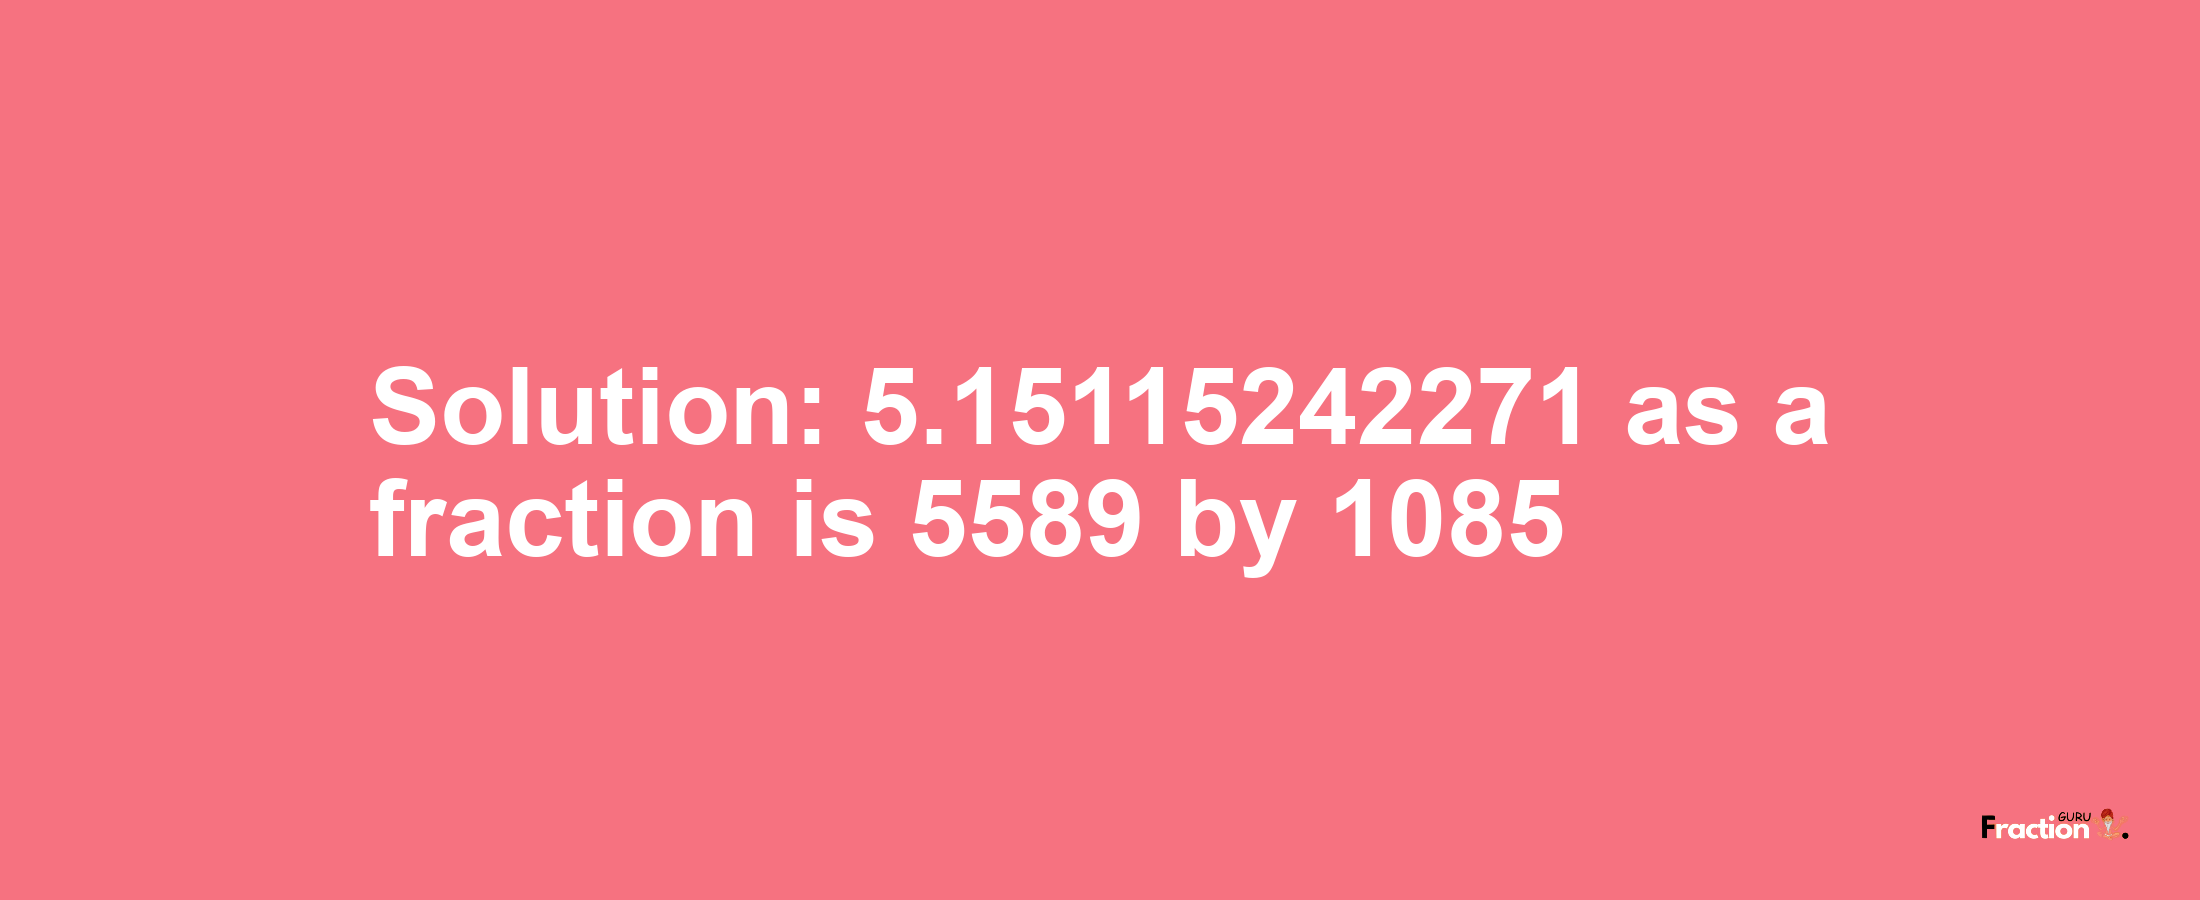 Solution:5.15115242271 as a fraction is 5589/1085